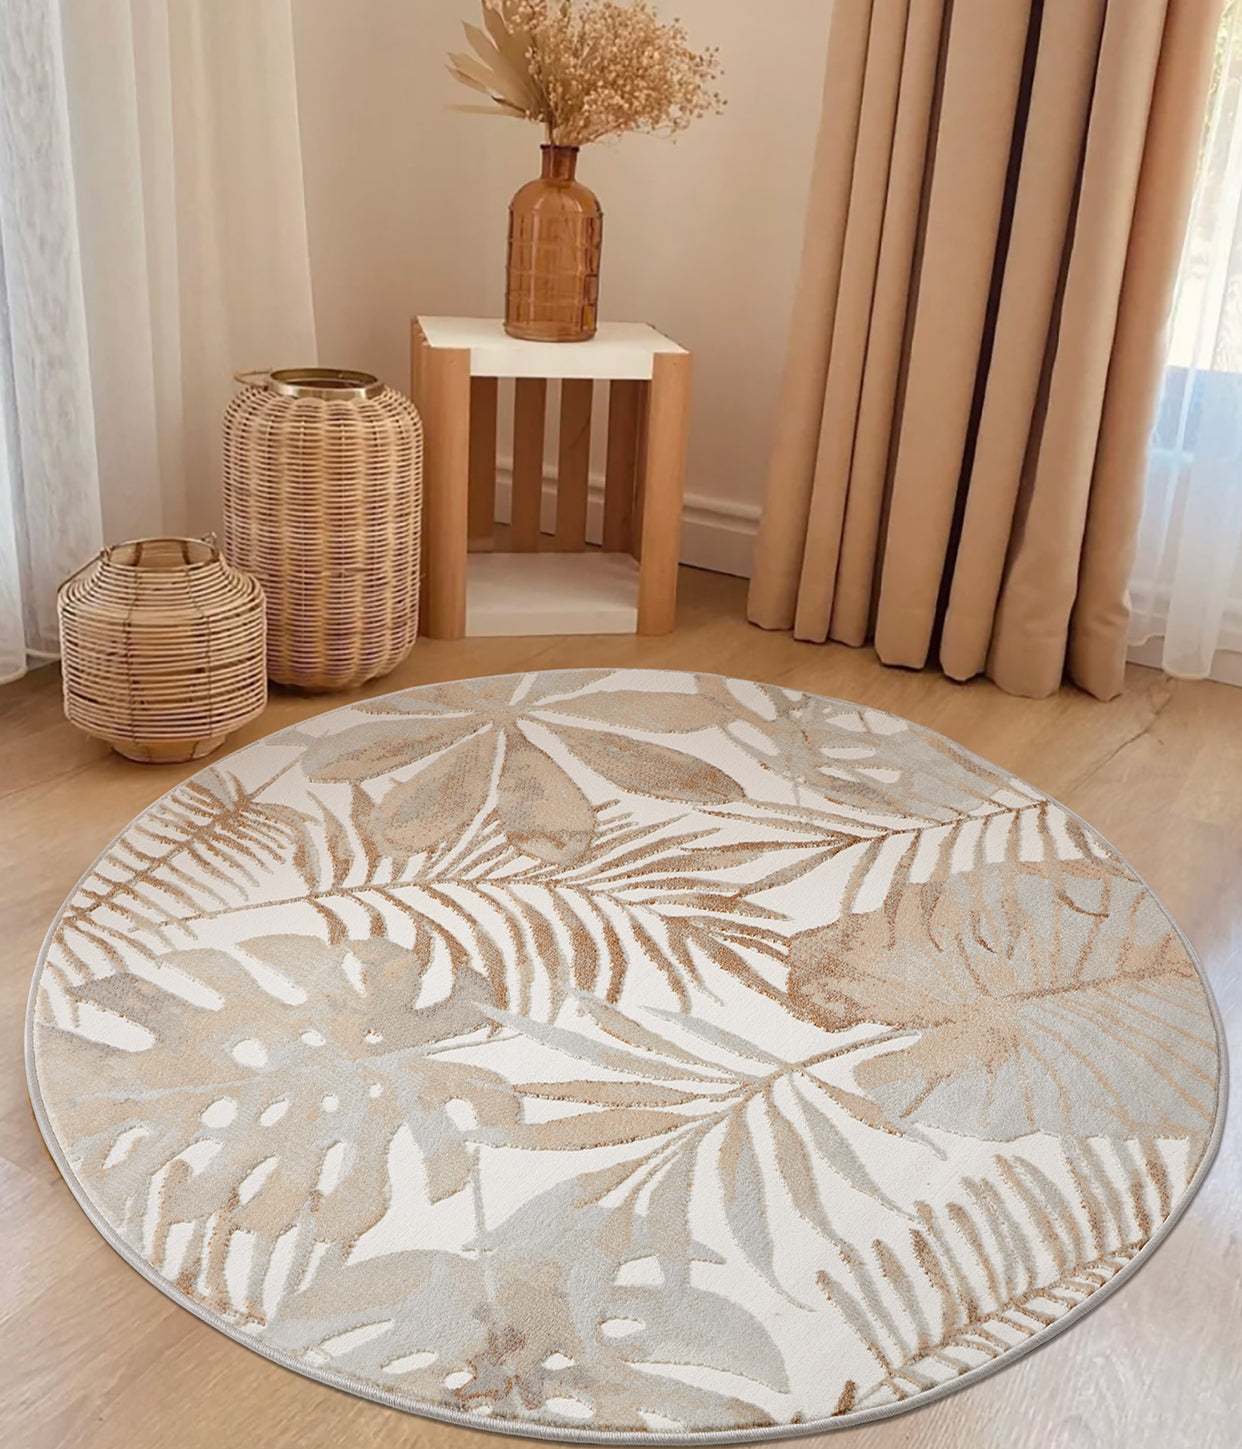 Abstract Modern Area Rugs under Coffee Table, Contemporary Area Rugs, Round Area Rugs, Modern Rugs in Bedroom, Dining Room Area Rug